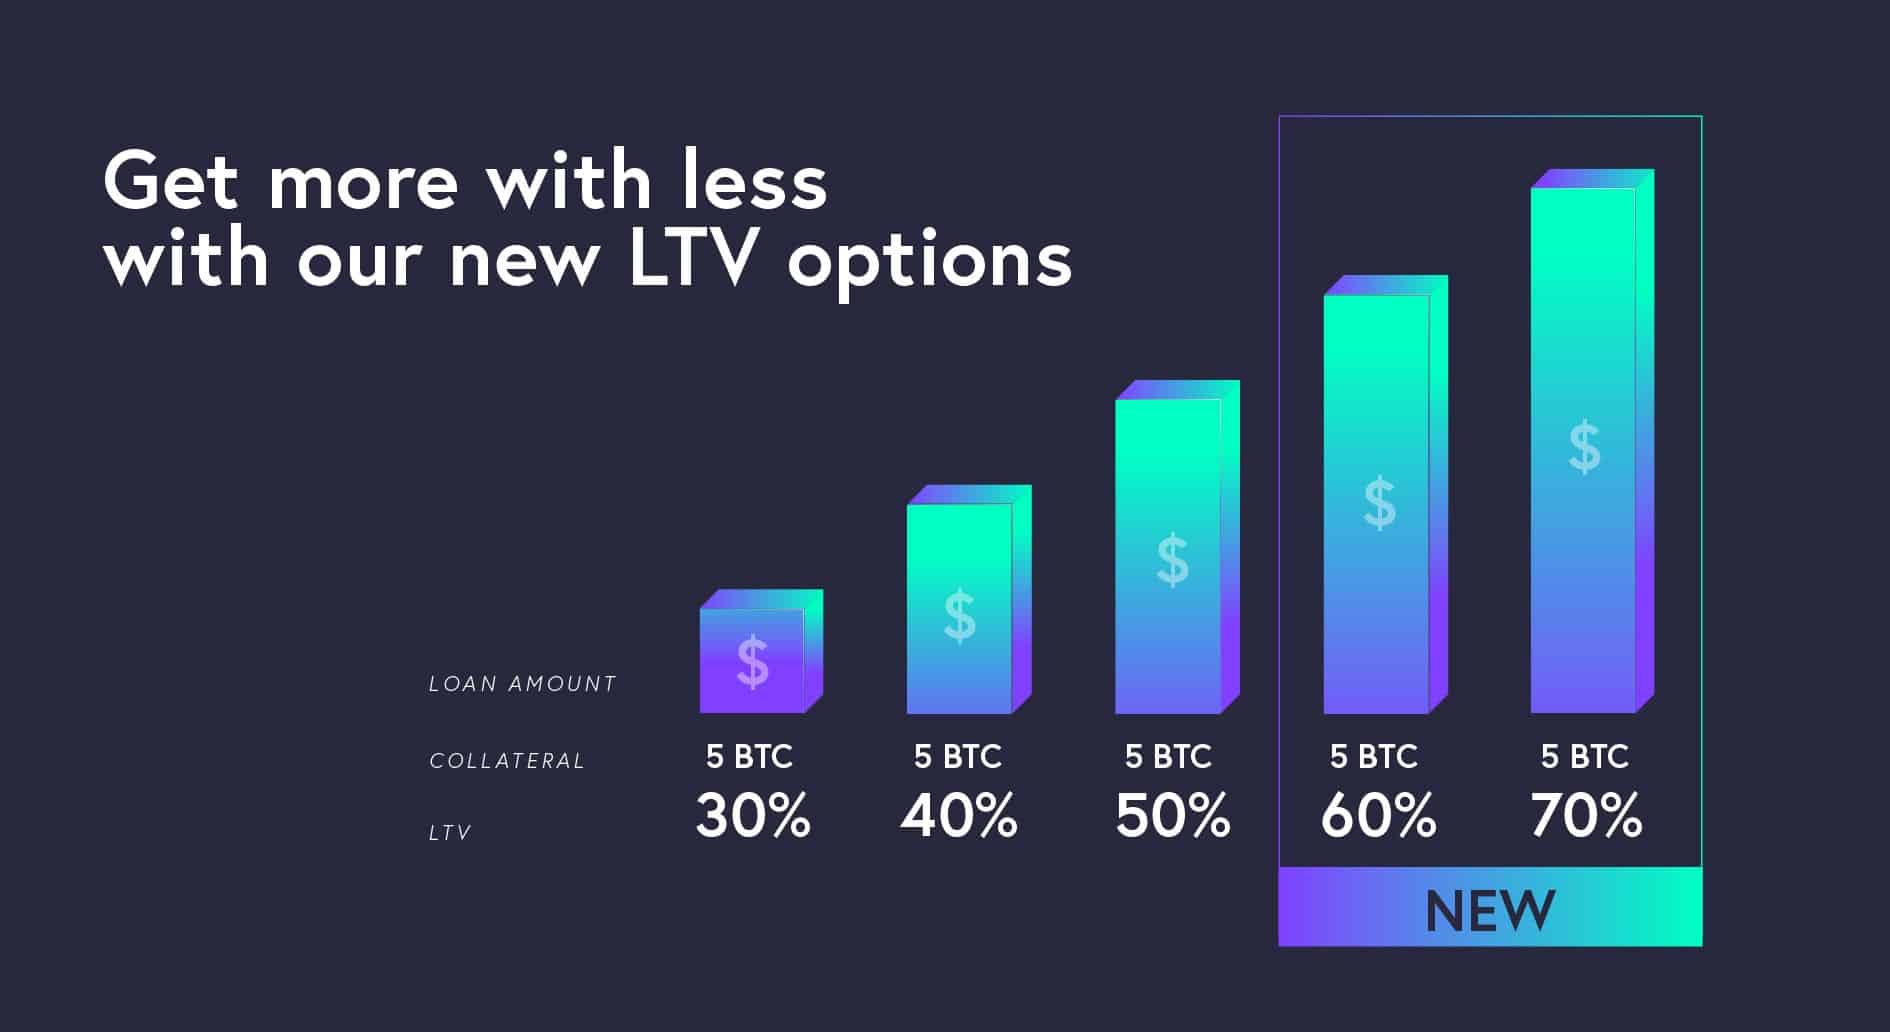 Graph showing new LTV options ranging from 30-70%